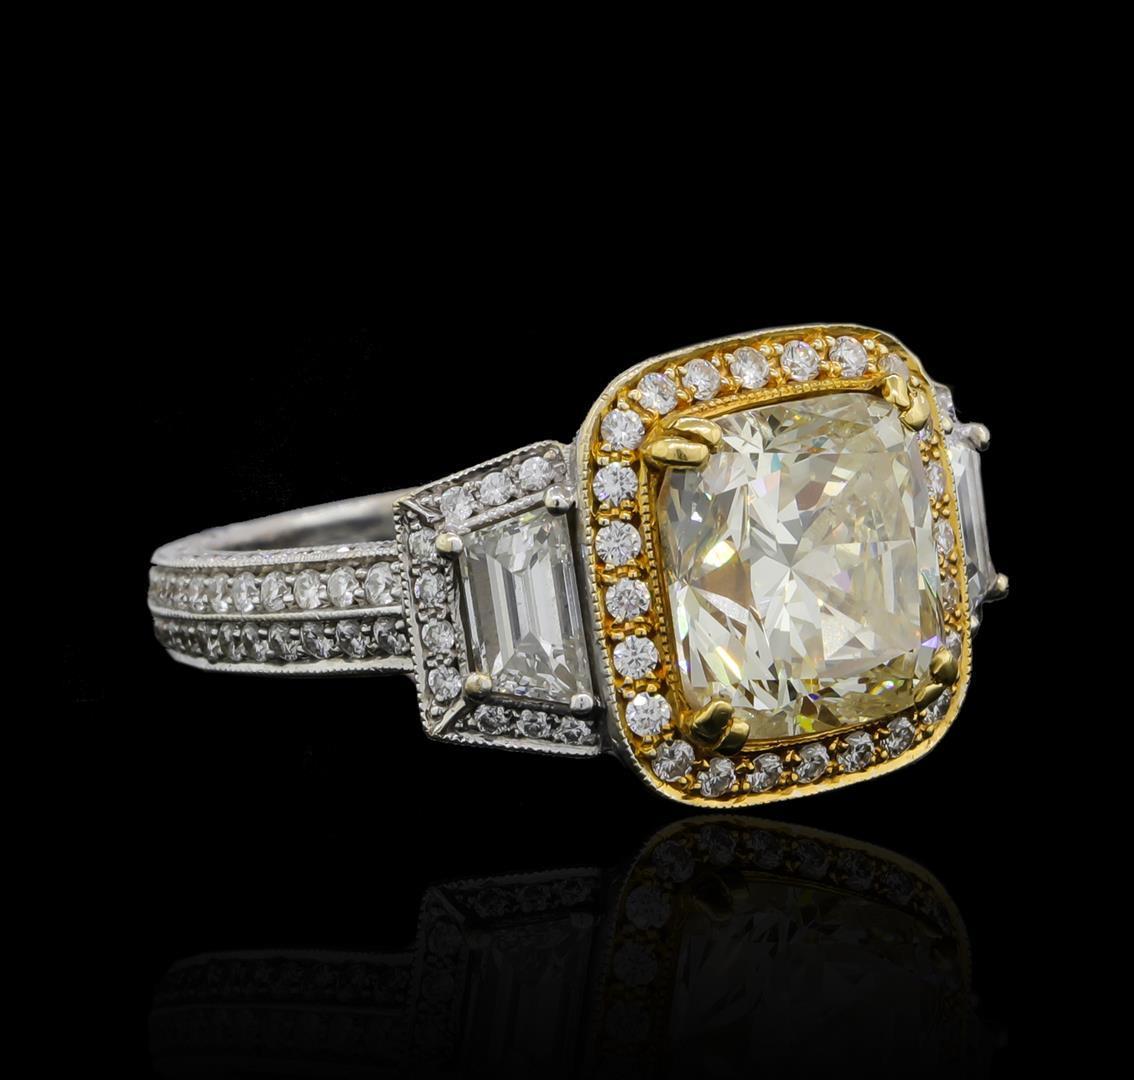 6.06 ctw Diamond Ring - 18KT White and Yellow Gold